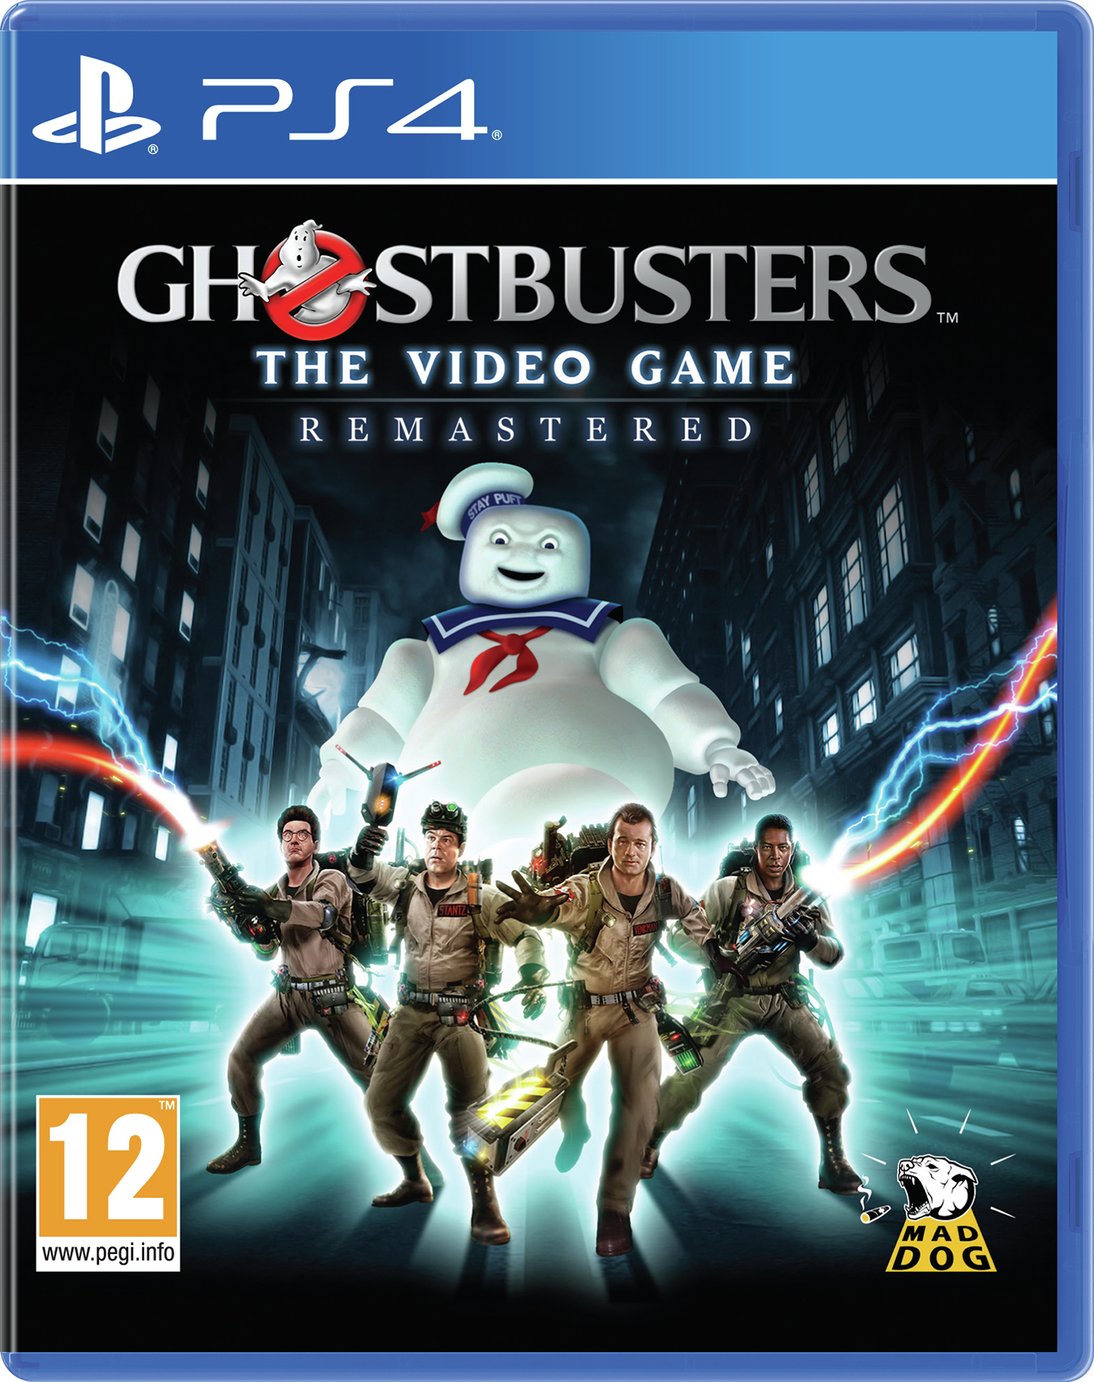 ghostbusters ps4 2019